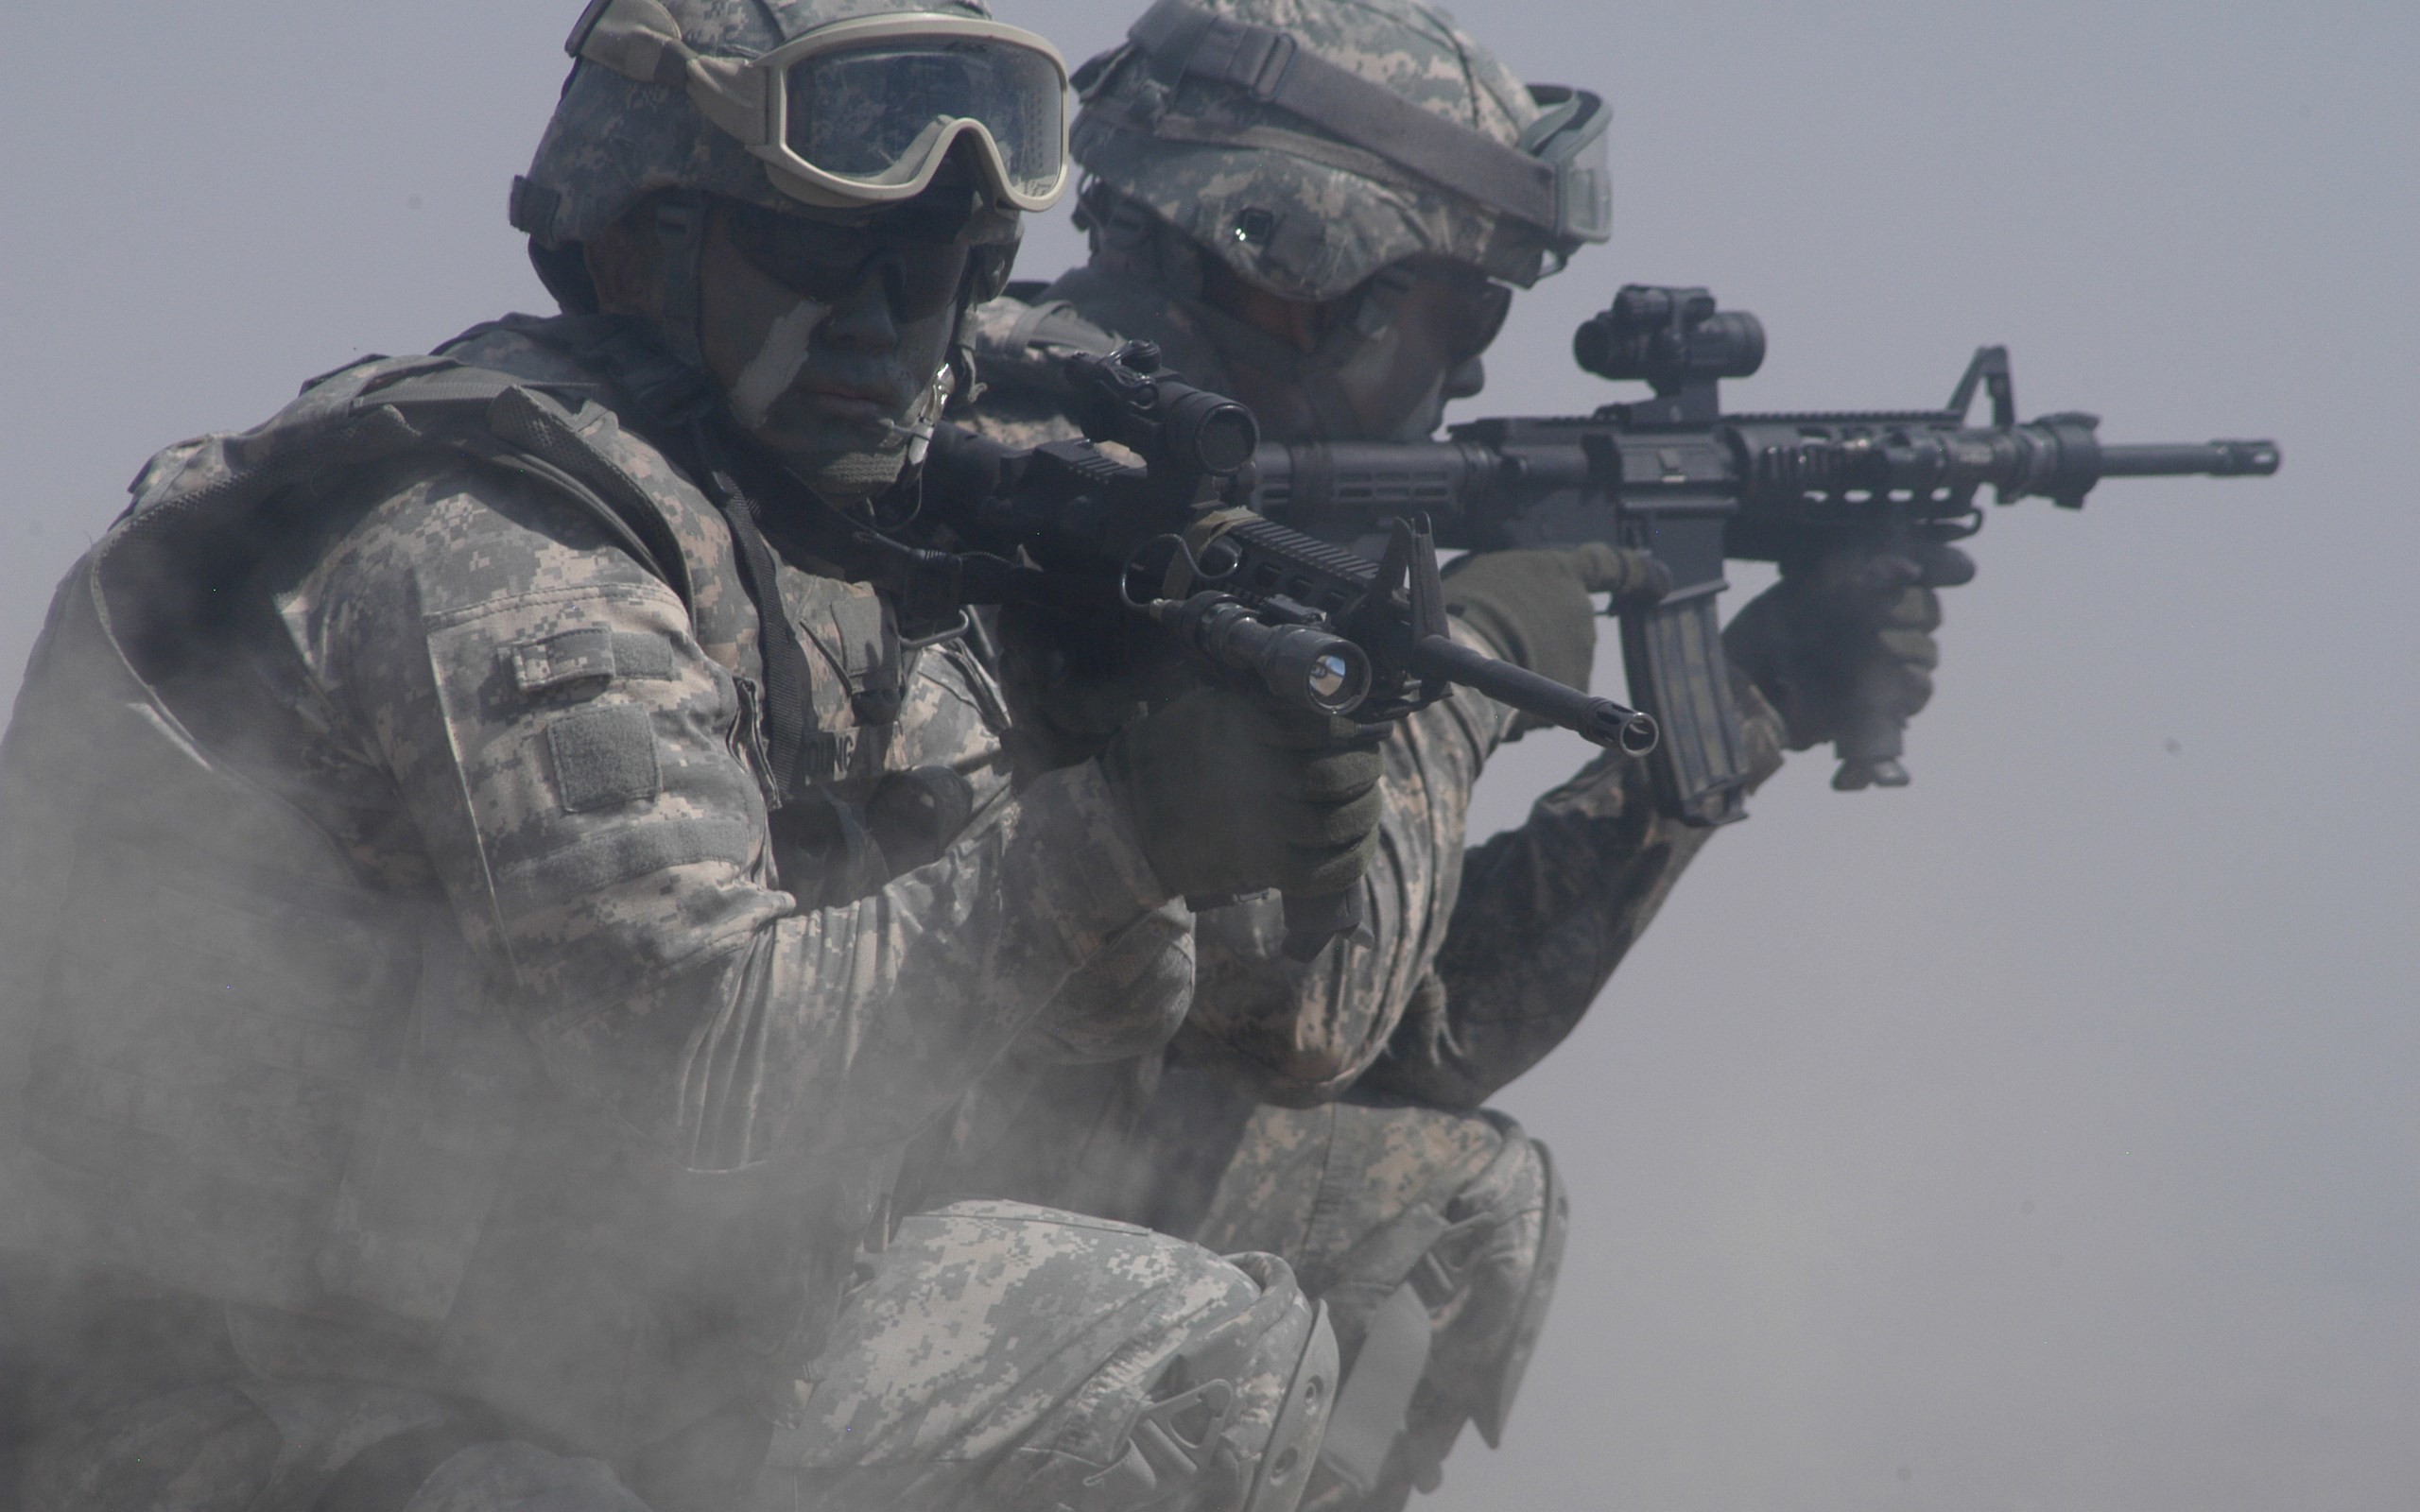 2560x1600 HD Widescreen Wallpapers - soldier pic,  (468 kB)